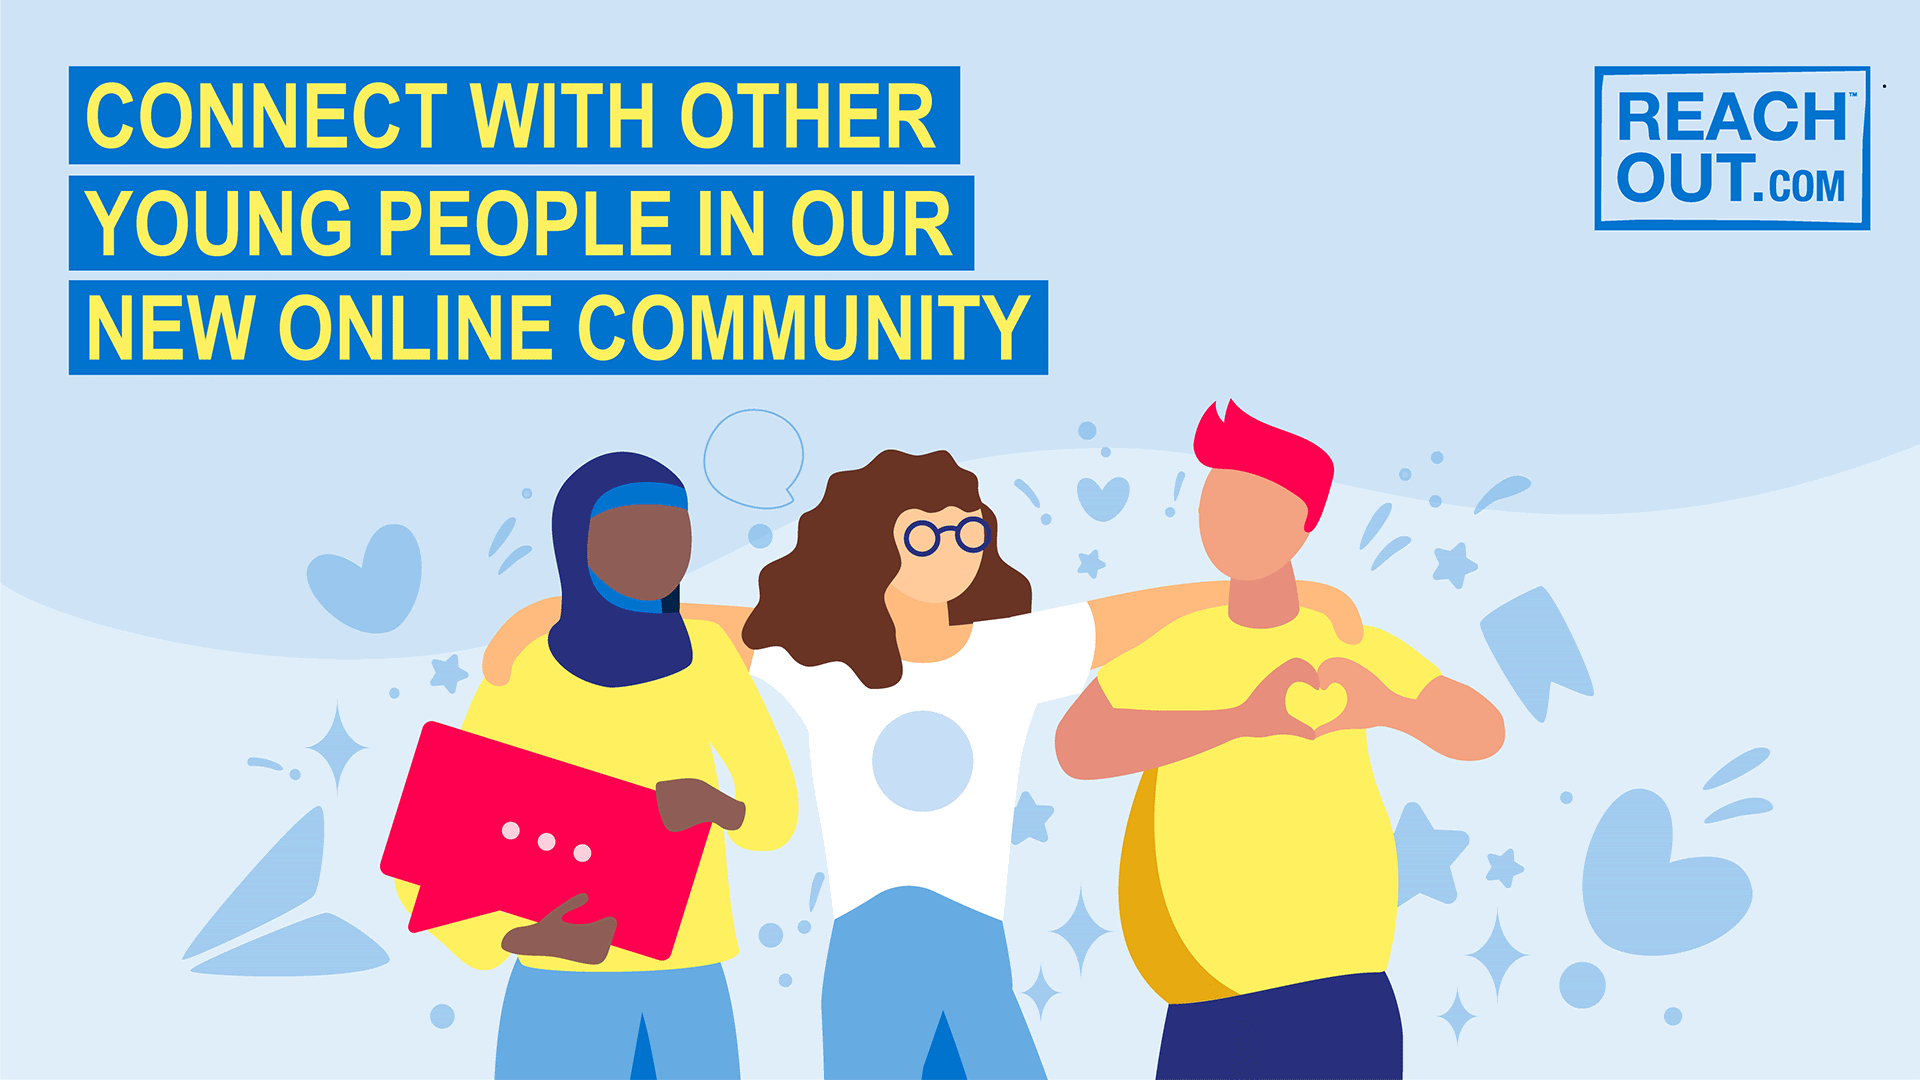 Connect with other young people in our new online community.